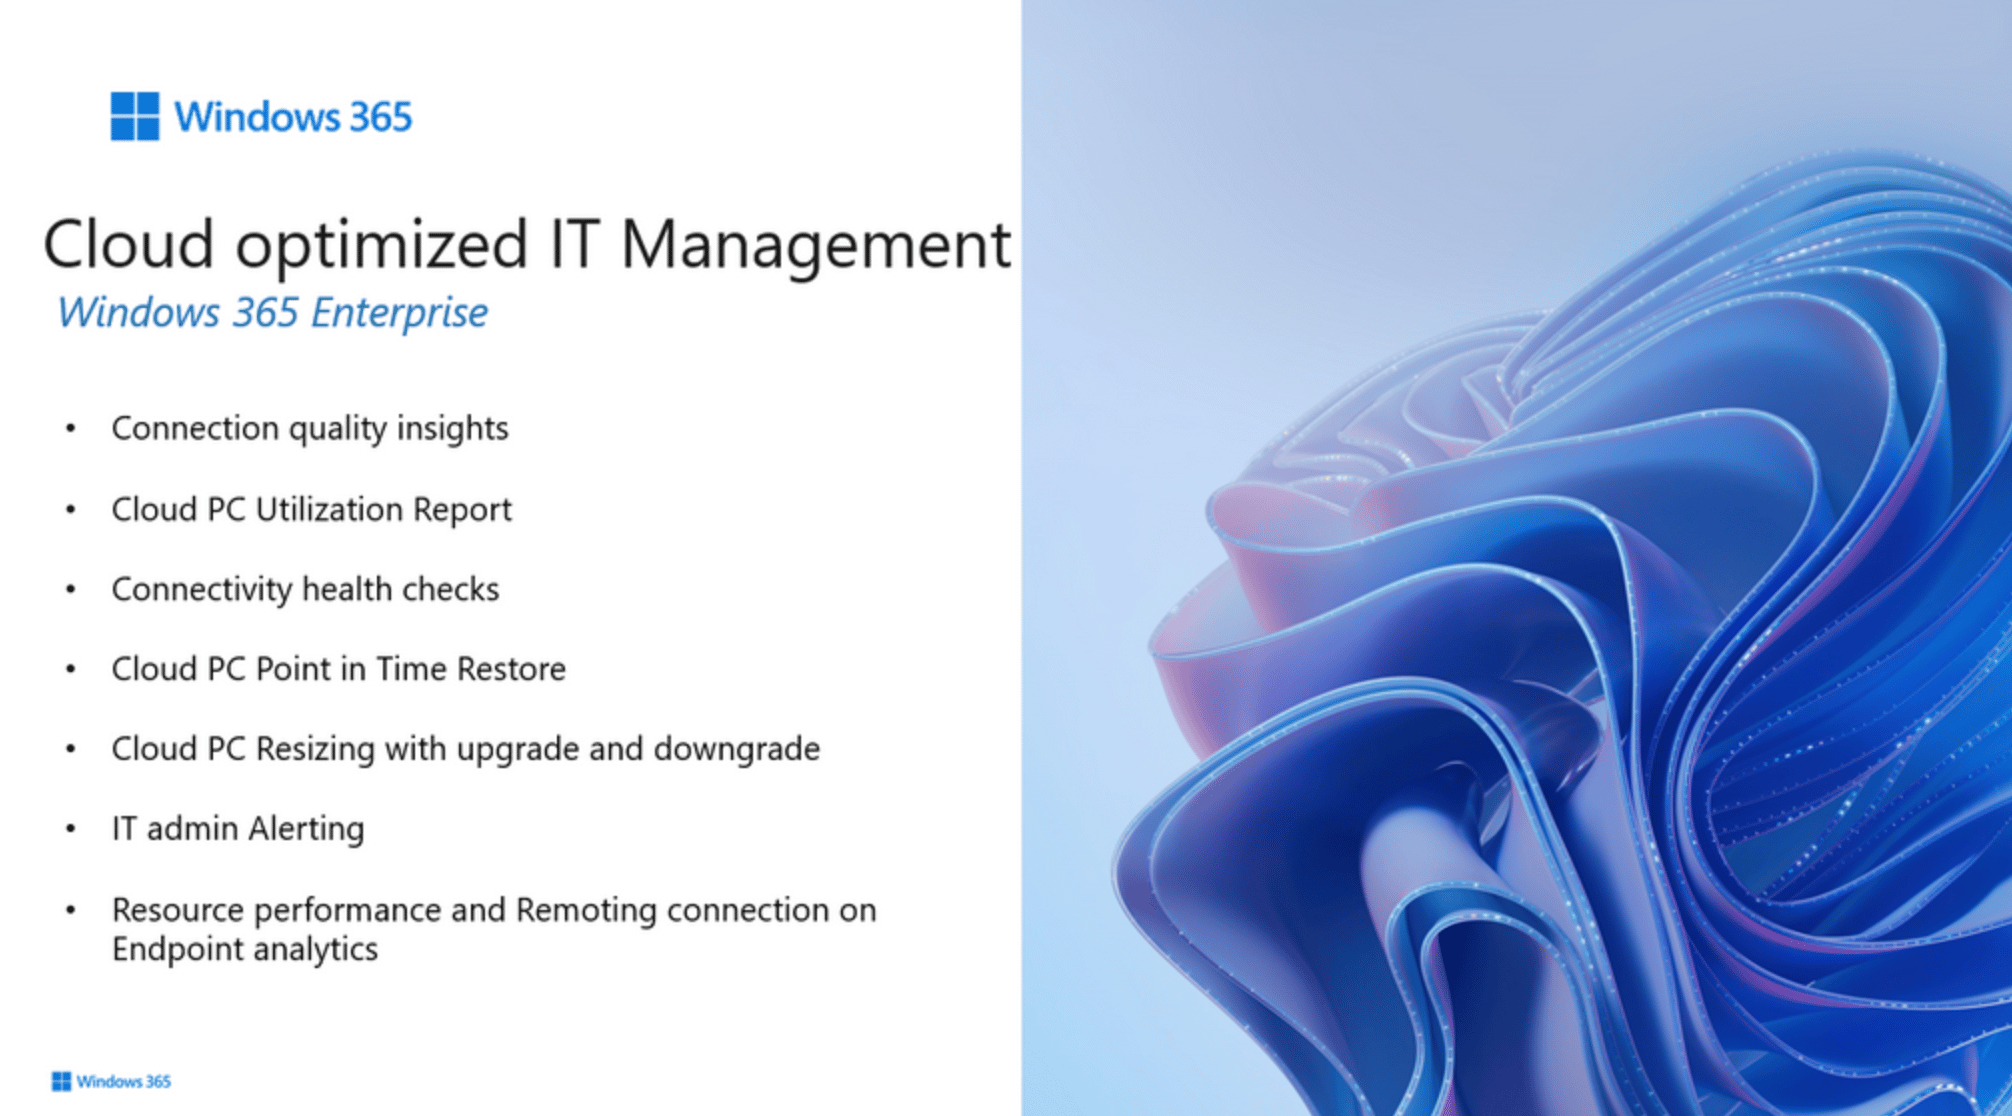 Slide shows cloud optimized IT management features, such as connection quality insights and the Cloud PC utilization report.